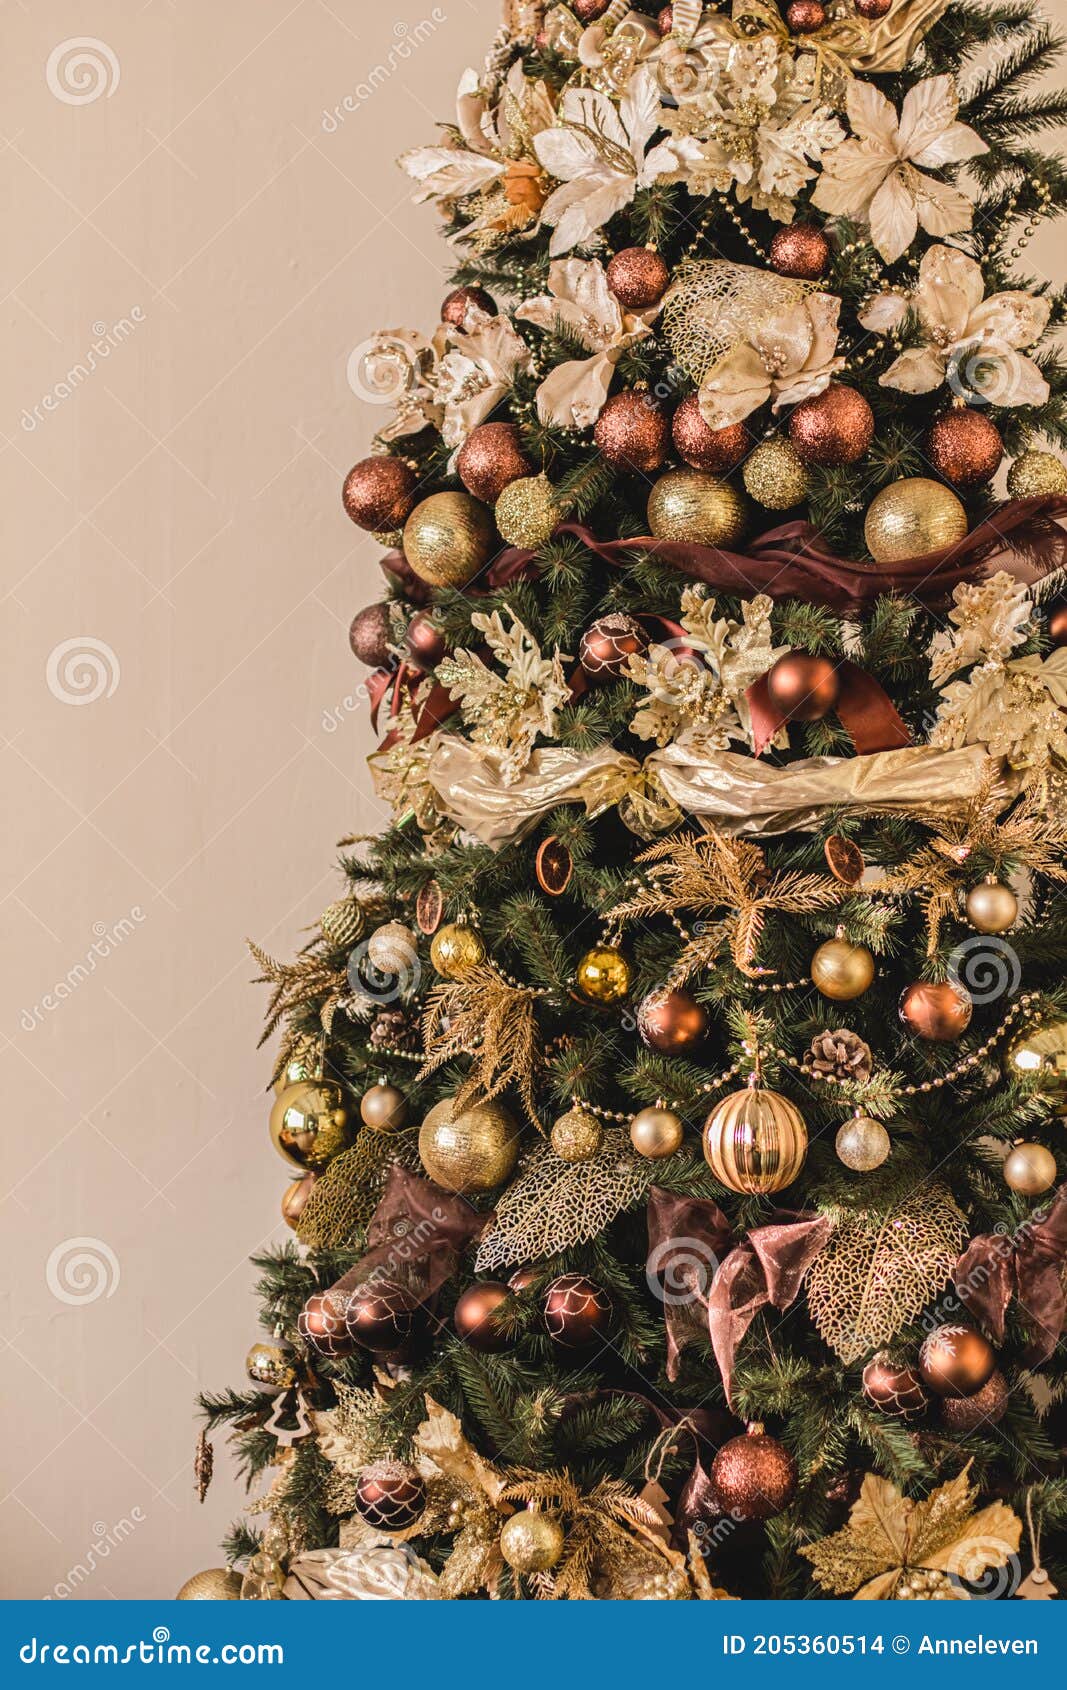 Golden Christmas Tree Look, Decor in Country Style As Holiday Home ...